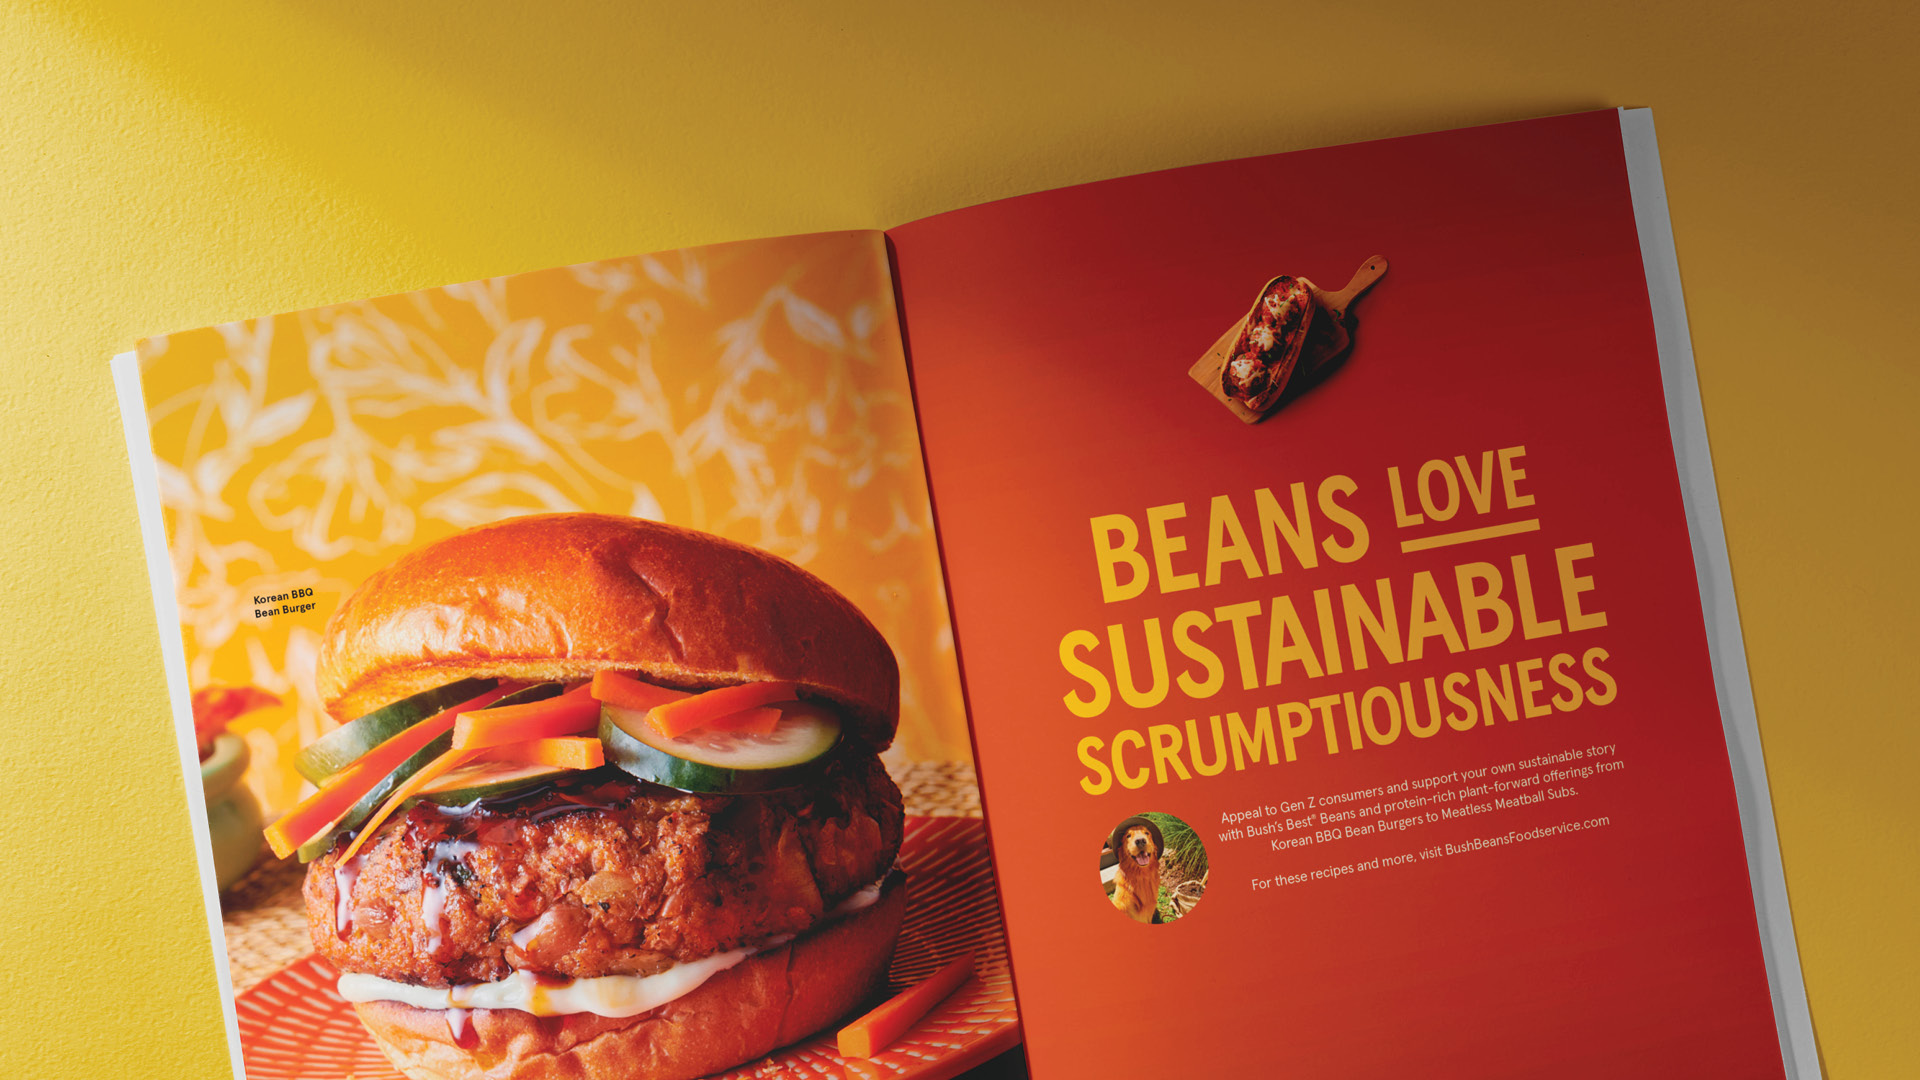 Beans love magazine ad example on a yellow background.